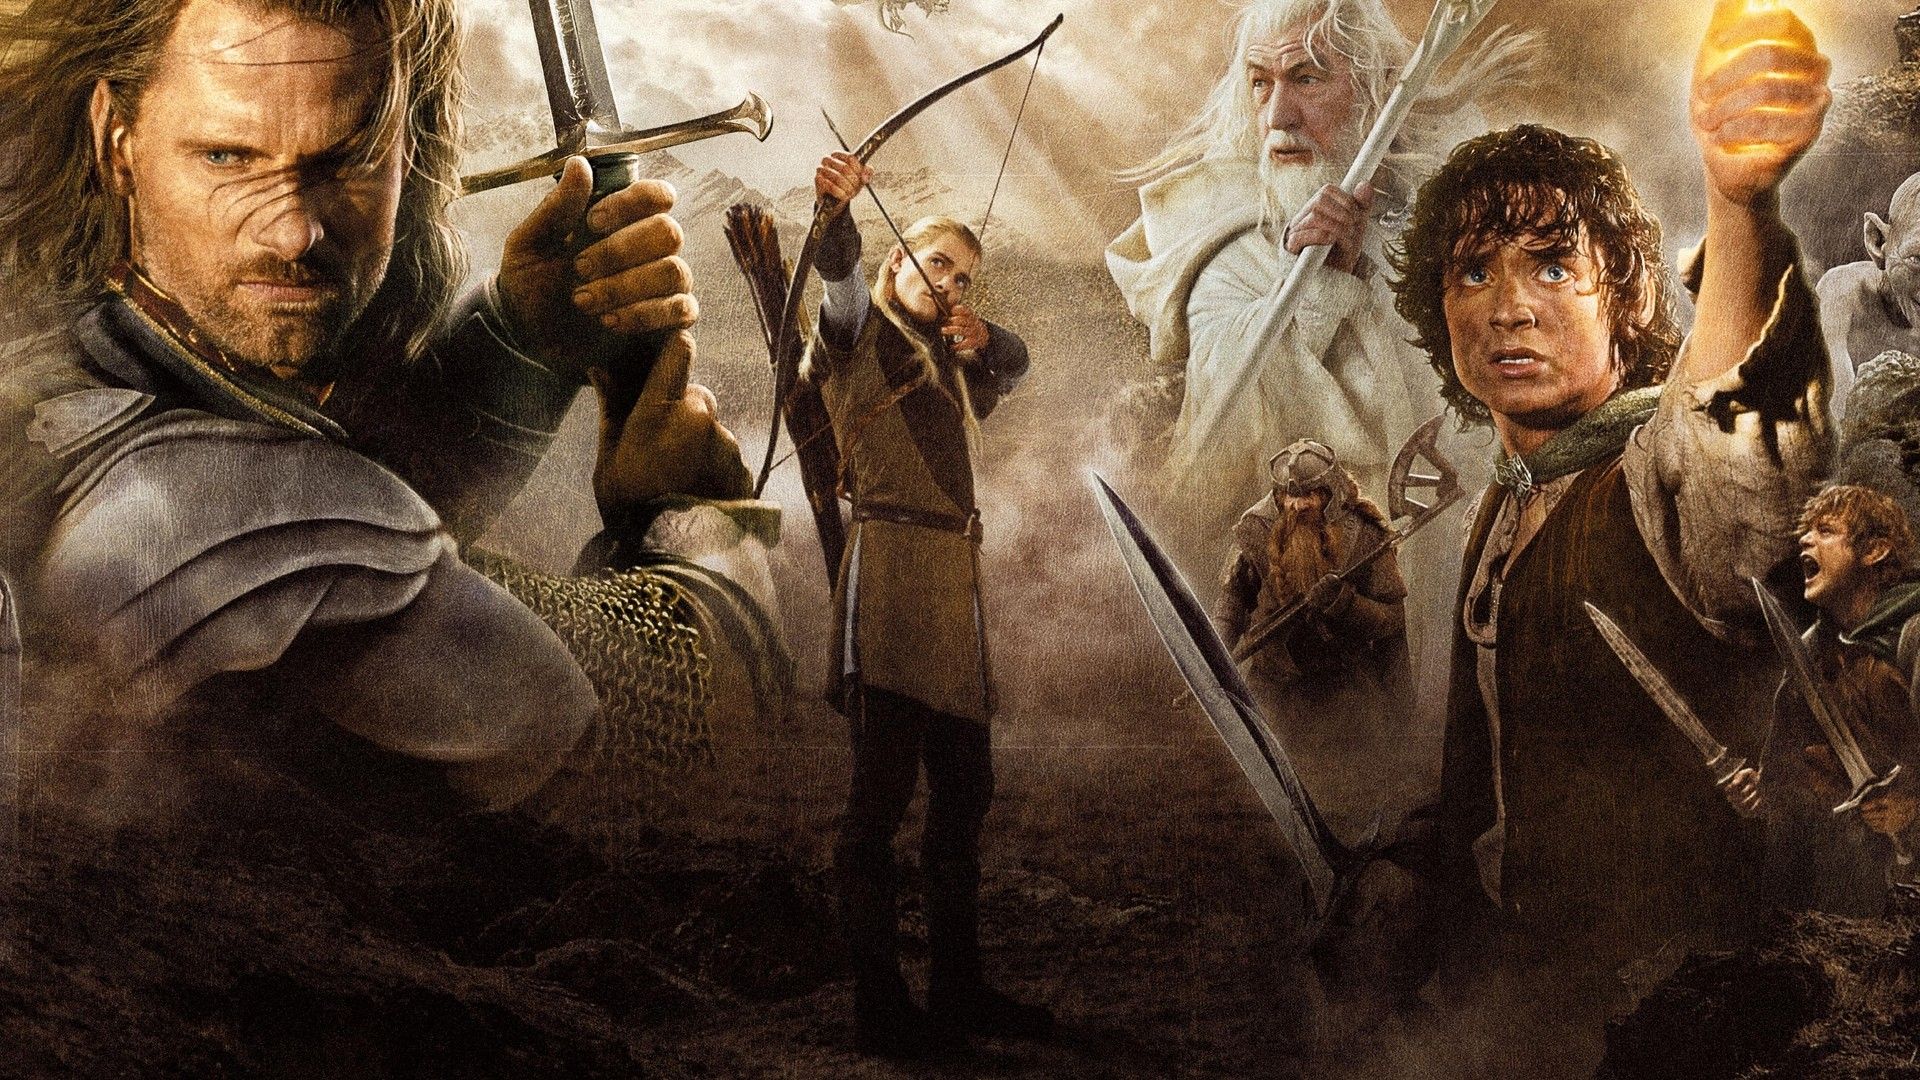 Wallpaper, movies, soldier, The Lord of the Rings, Legolas, Gandalf, Person, mythology, The Lord of the Rings The Return of the King, Frodo Baggins, Samwise Gamgee, Viggo Mortensen, Aragorn, Elijah Wood